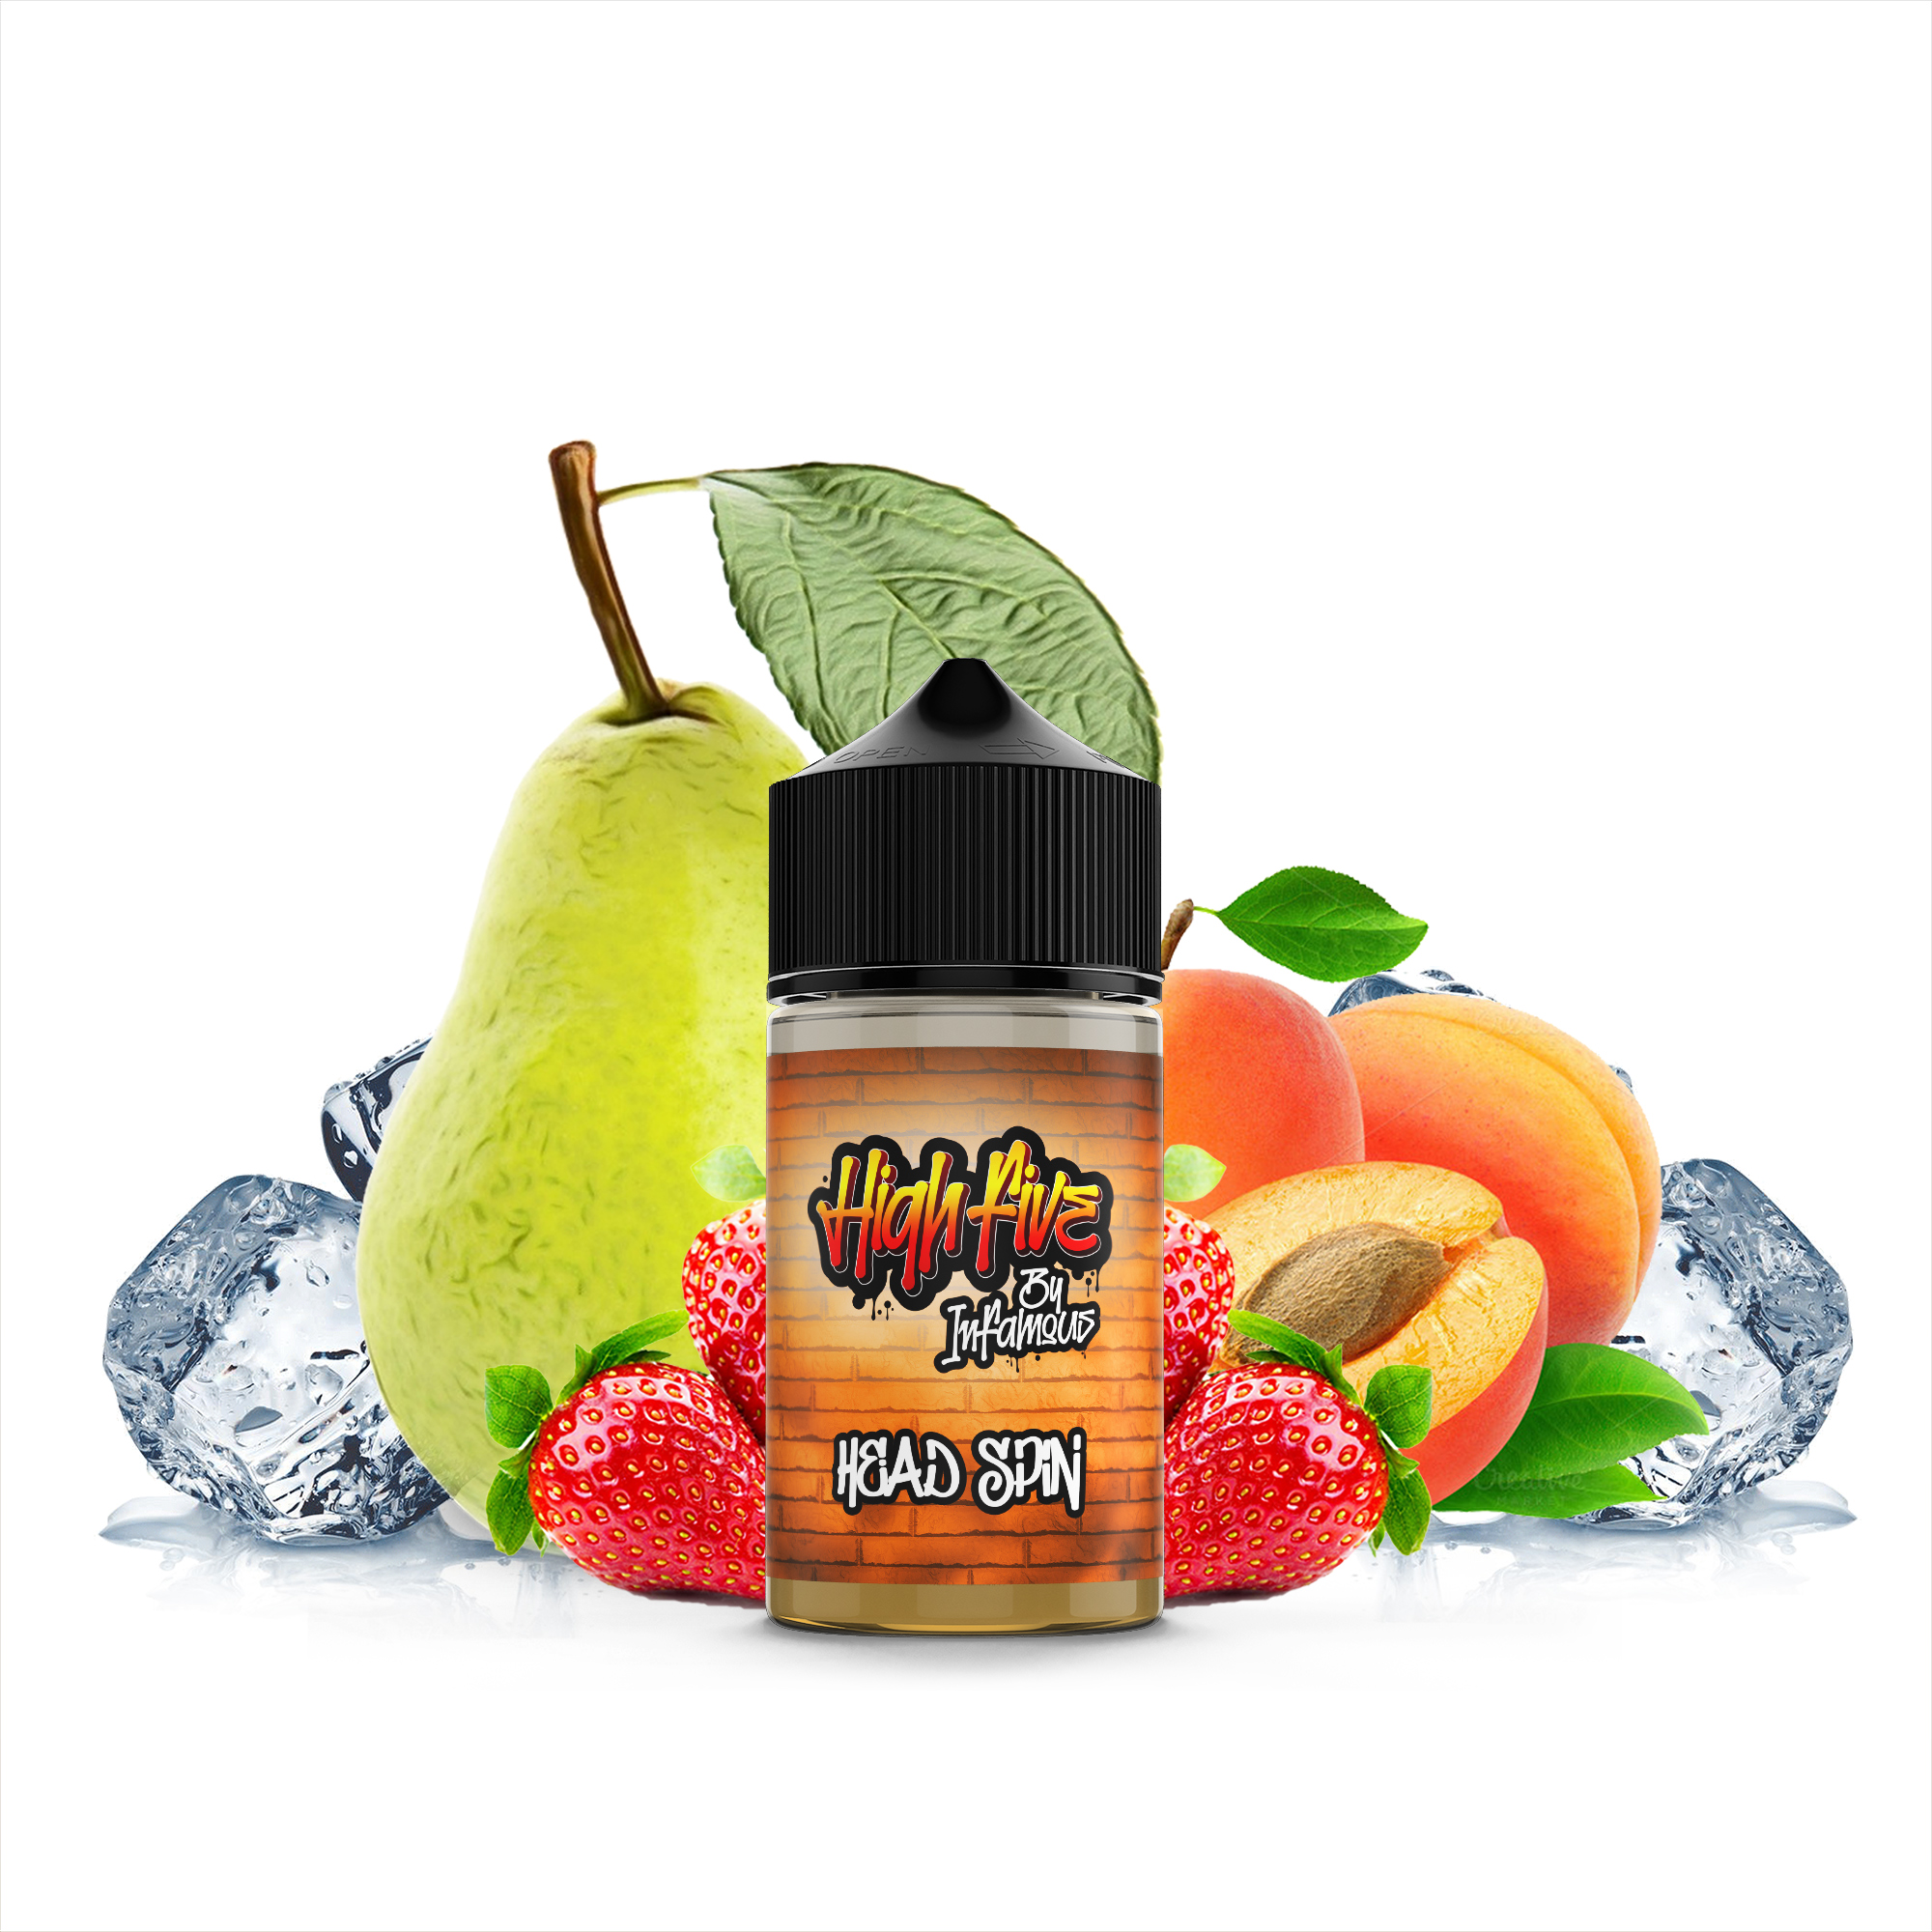 INFAMOUS HIGH FIVE AROMA HEAD SPIN 10 ml